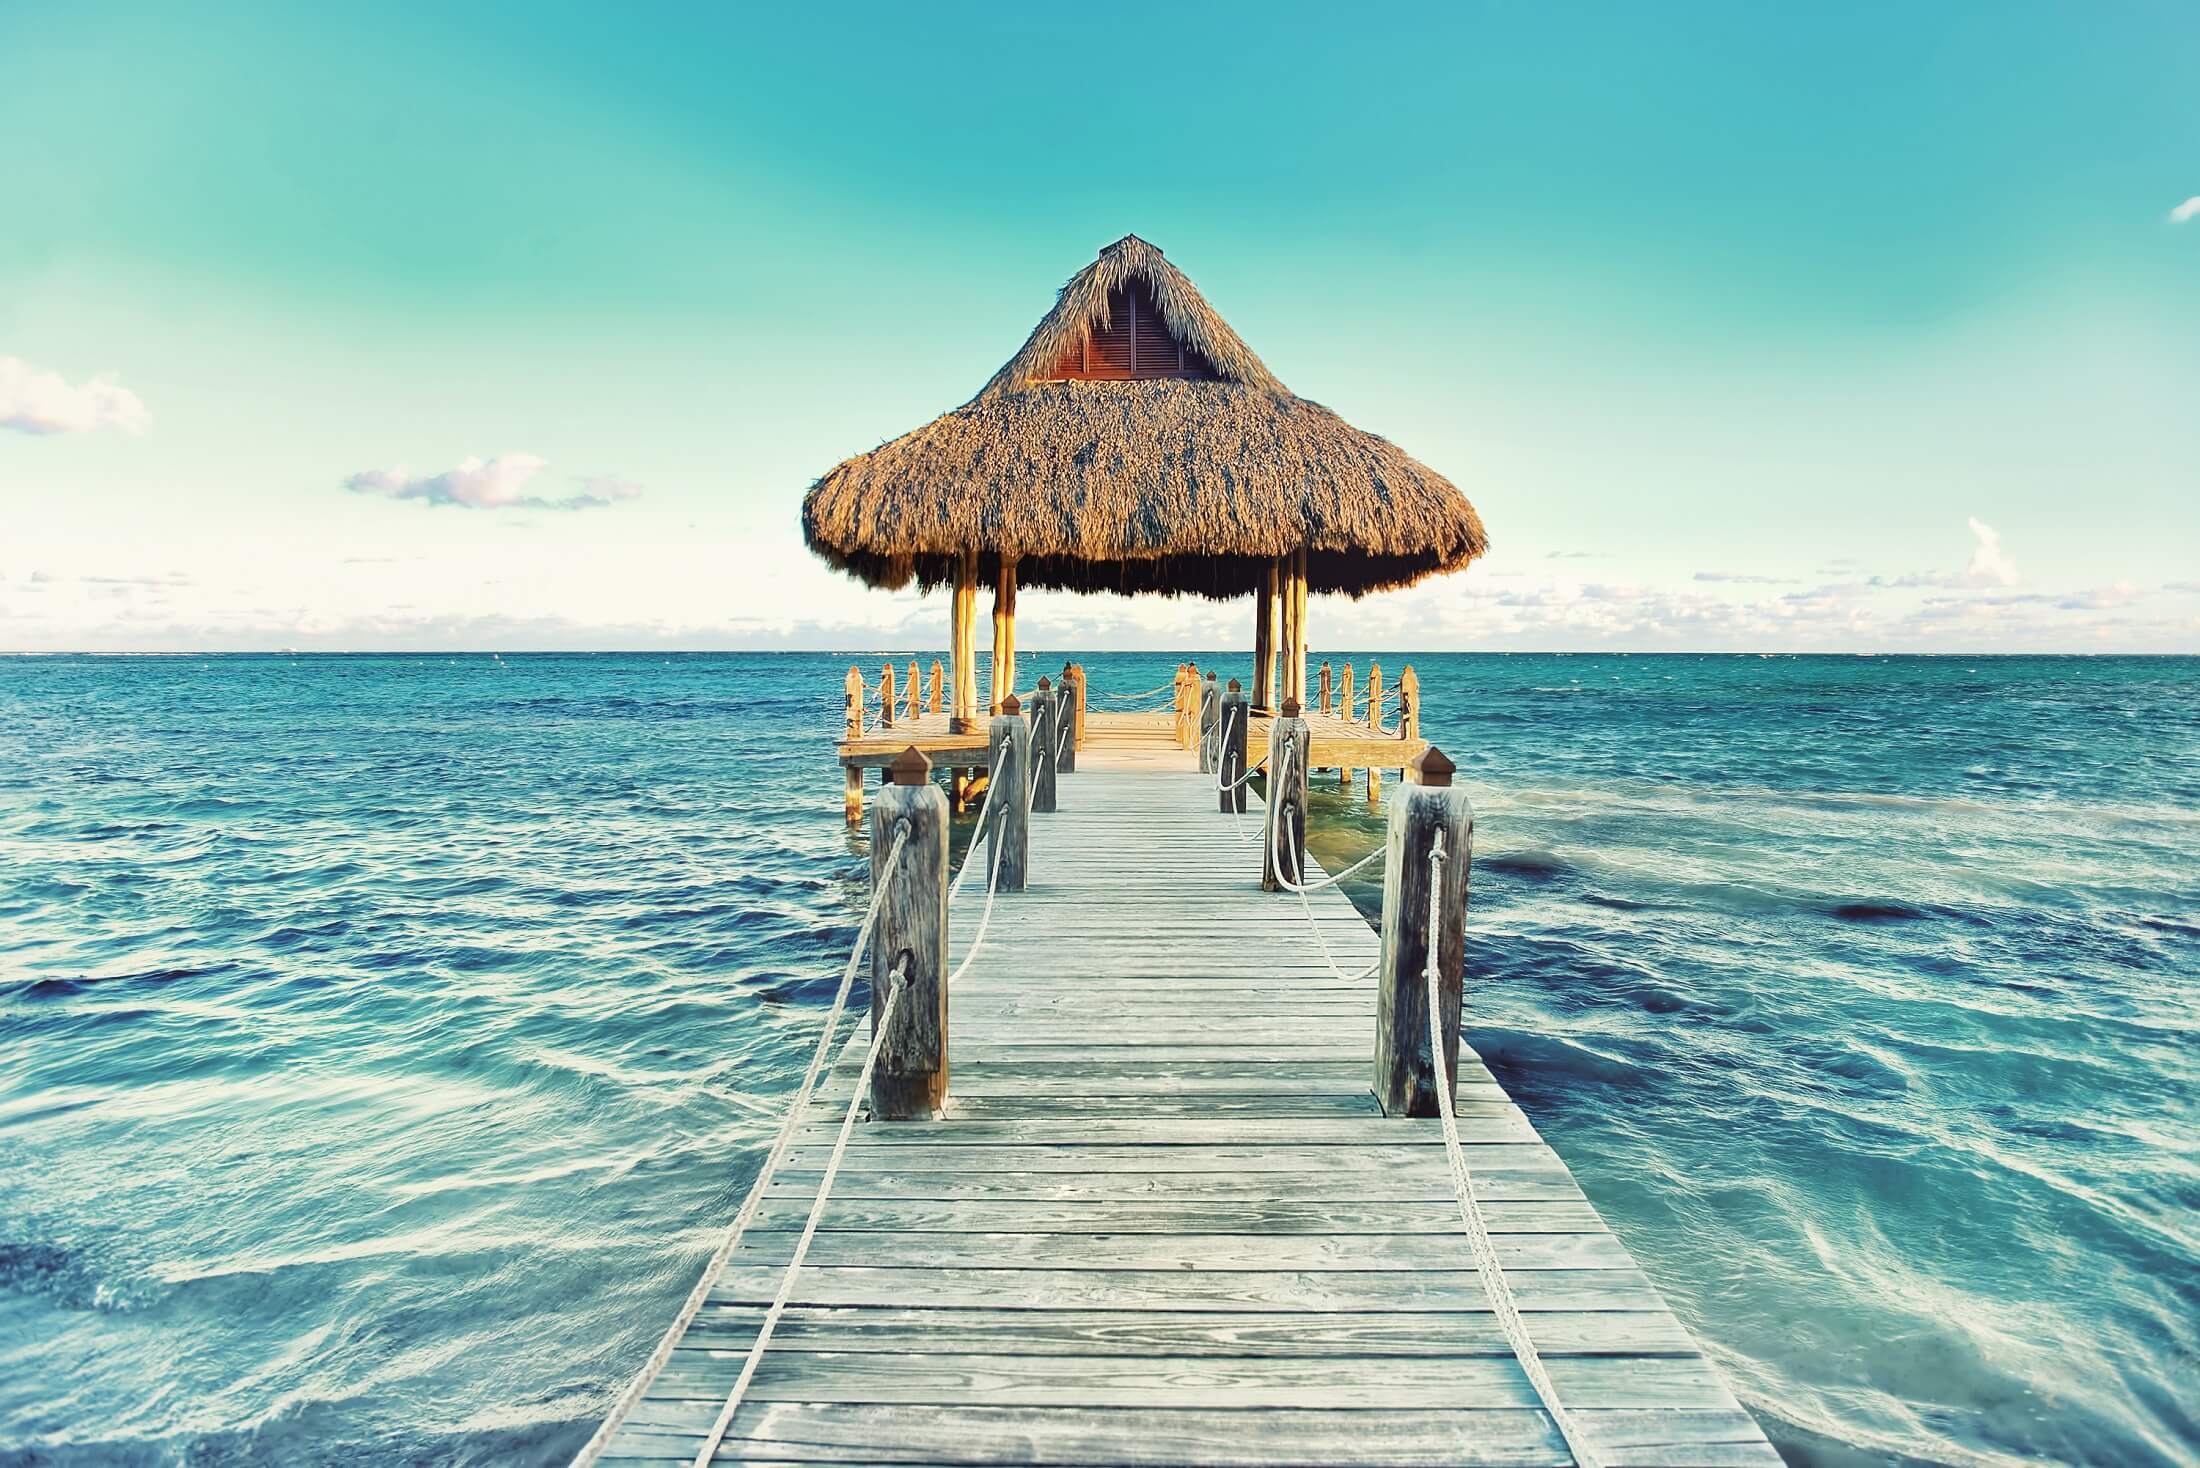 Tropical white sandy beach. Palm leaf roofed wooden pier with gazebo on the beach. Punta Cana, Dominican Republic. Instagram filter